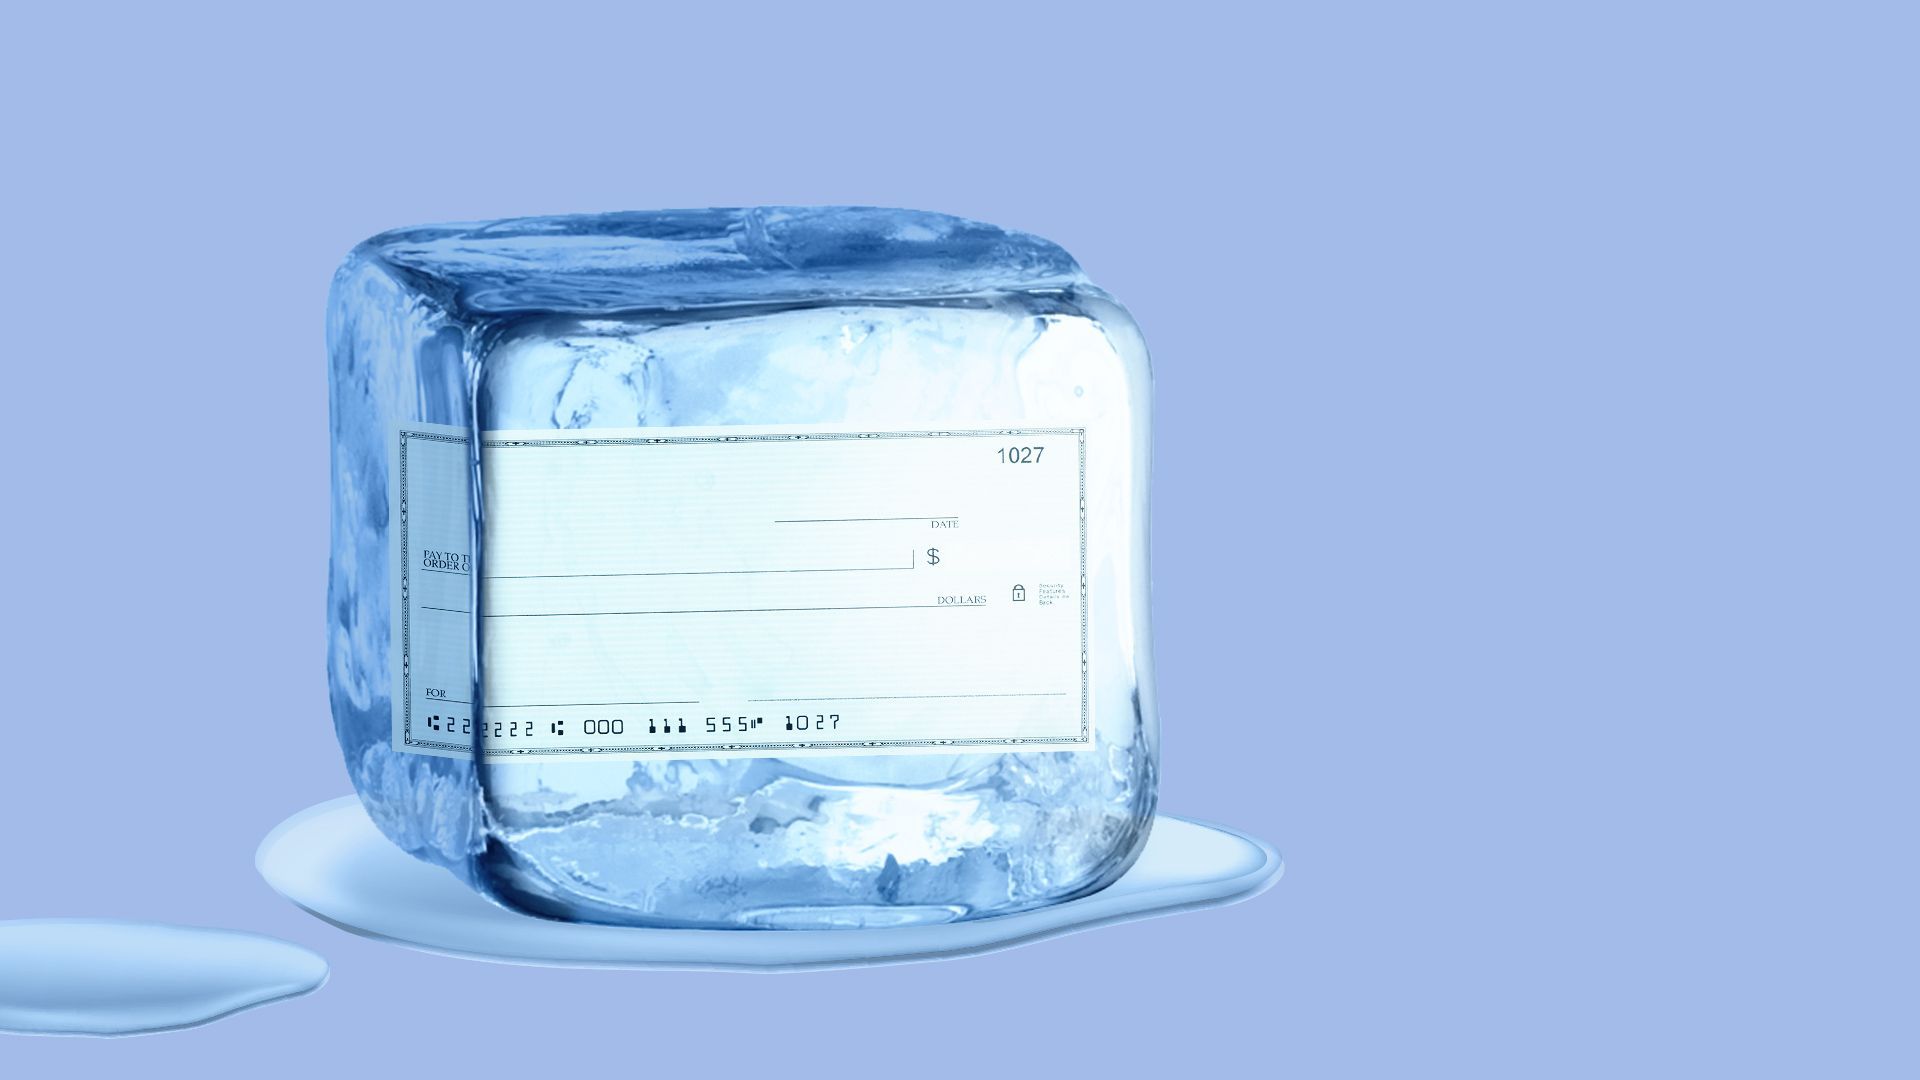 Illustration of a blank check in an ice cube.  